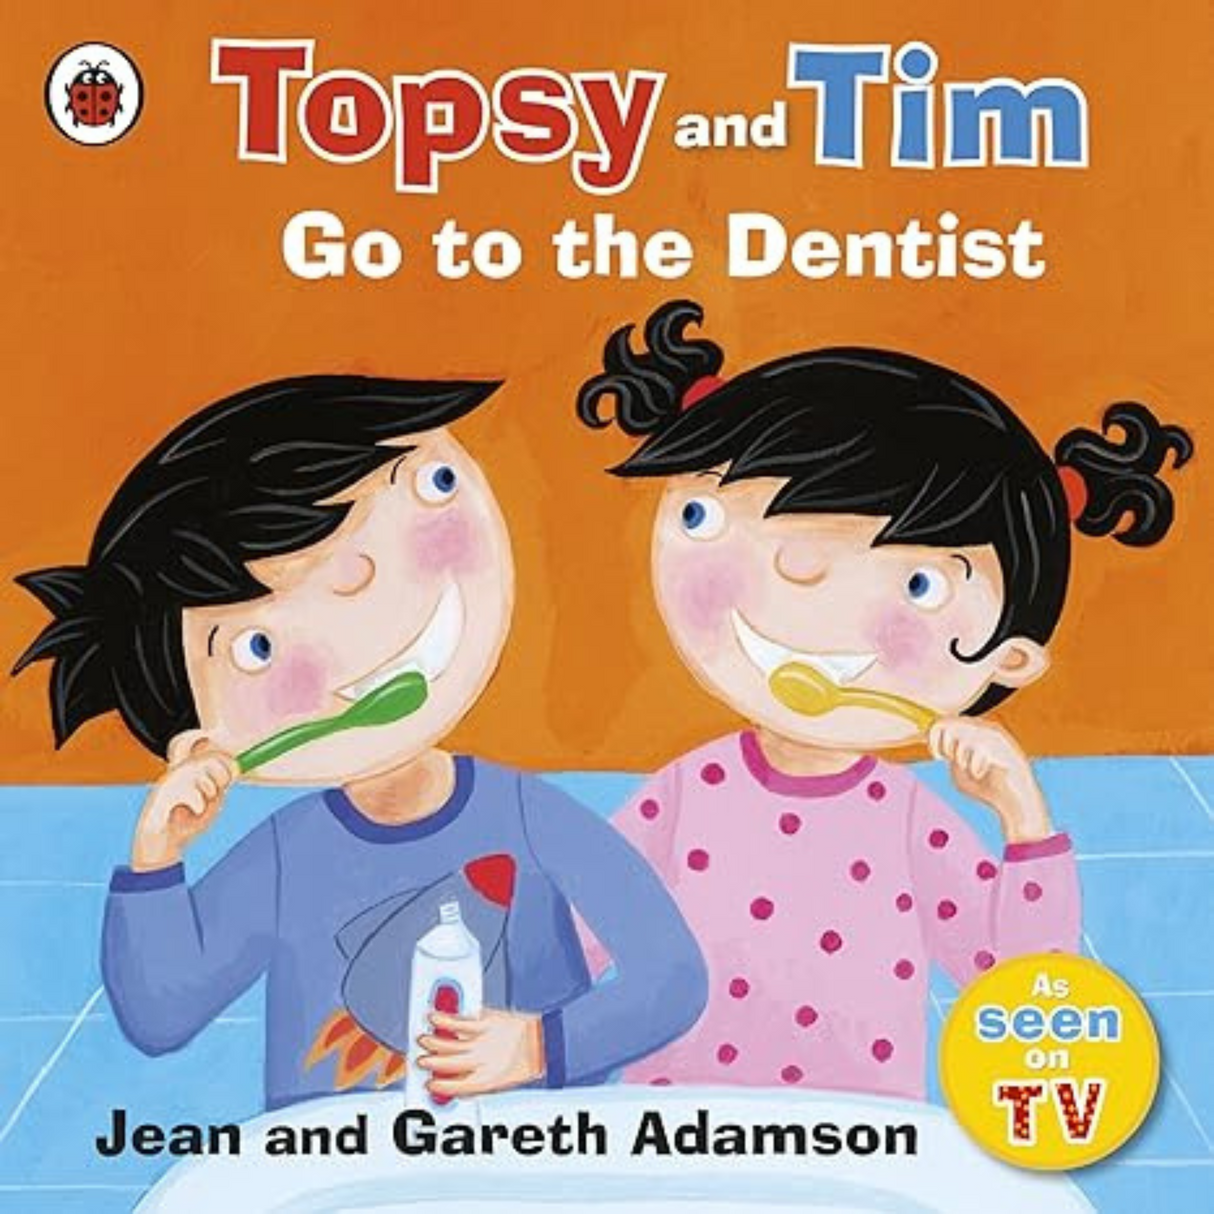 Topsy and Tim: Go to the Dentist Paperback – 6 Aug. 2009